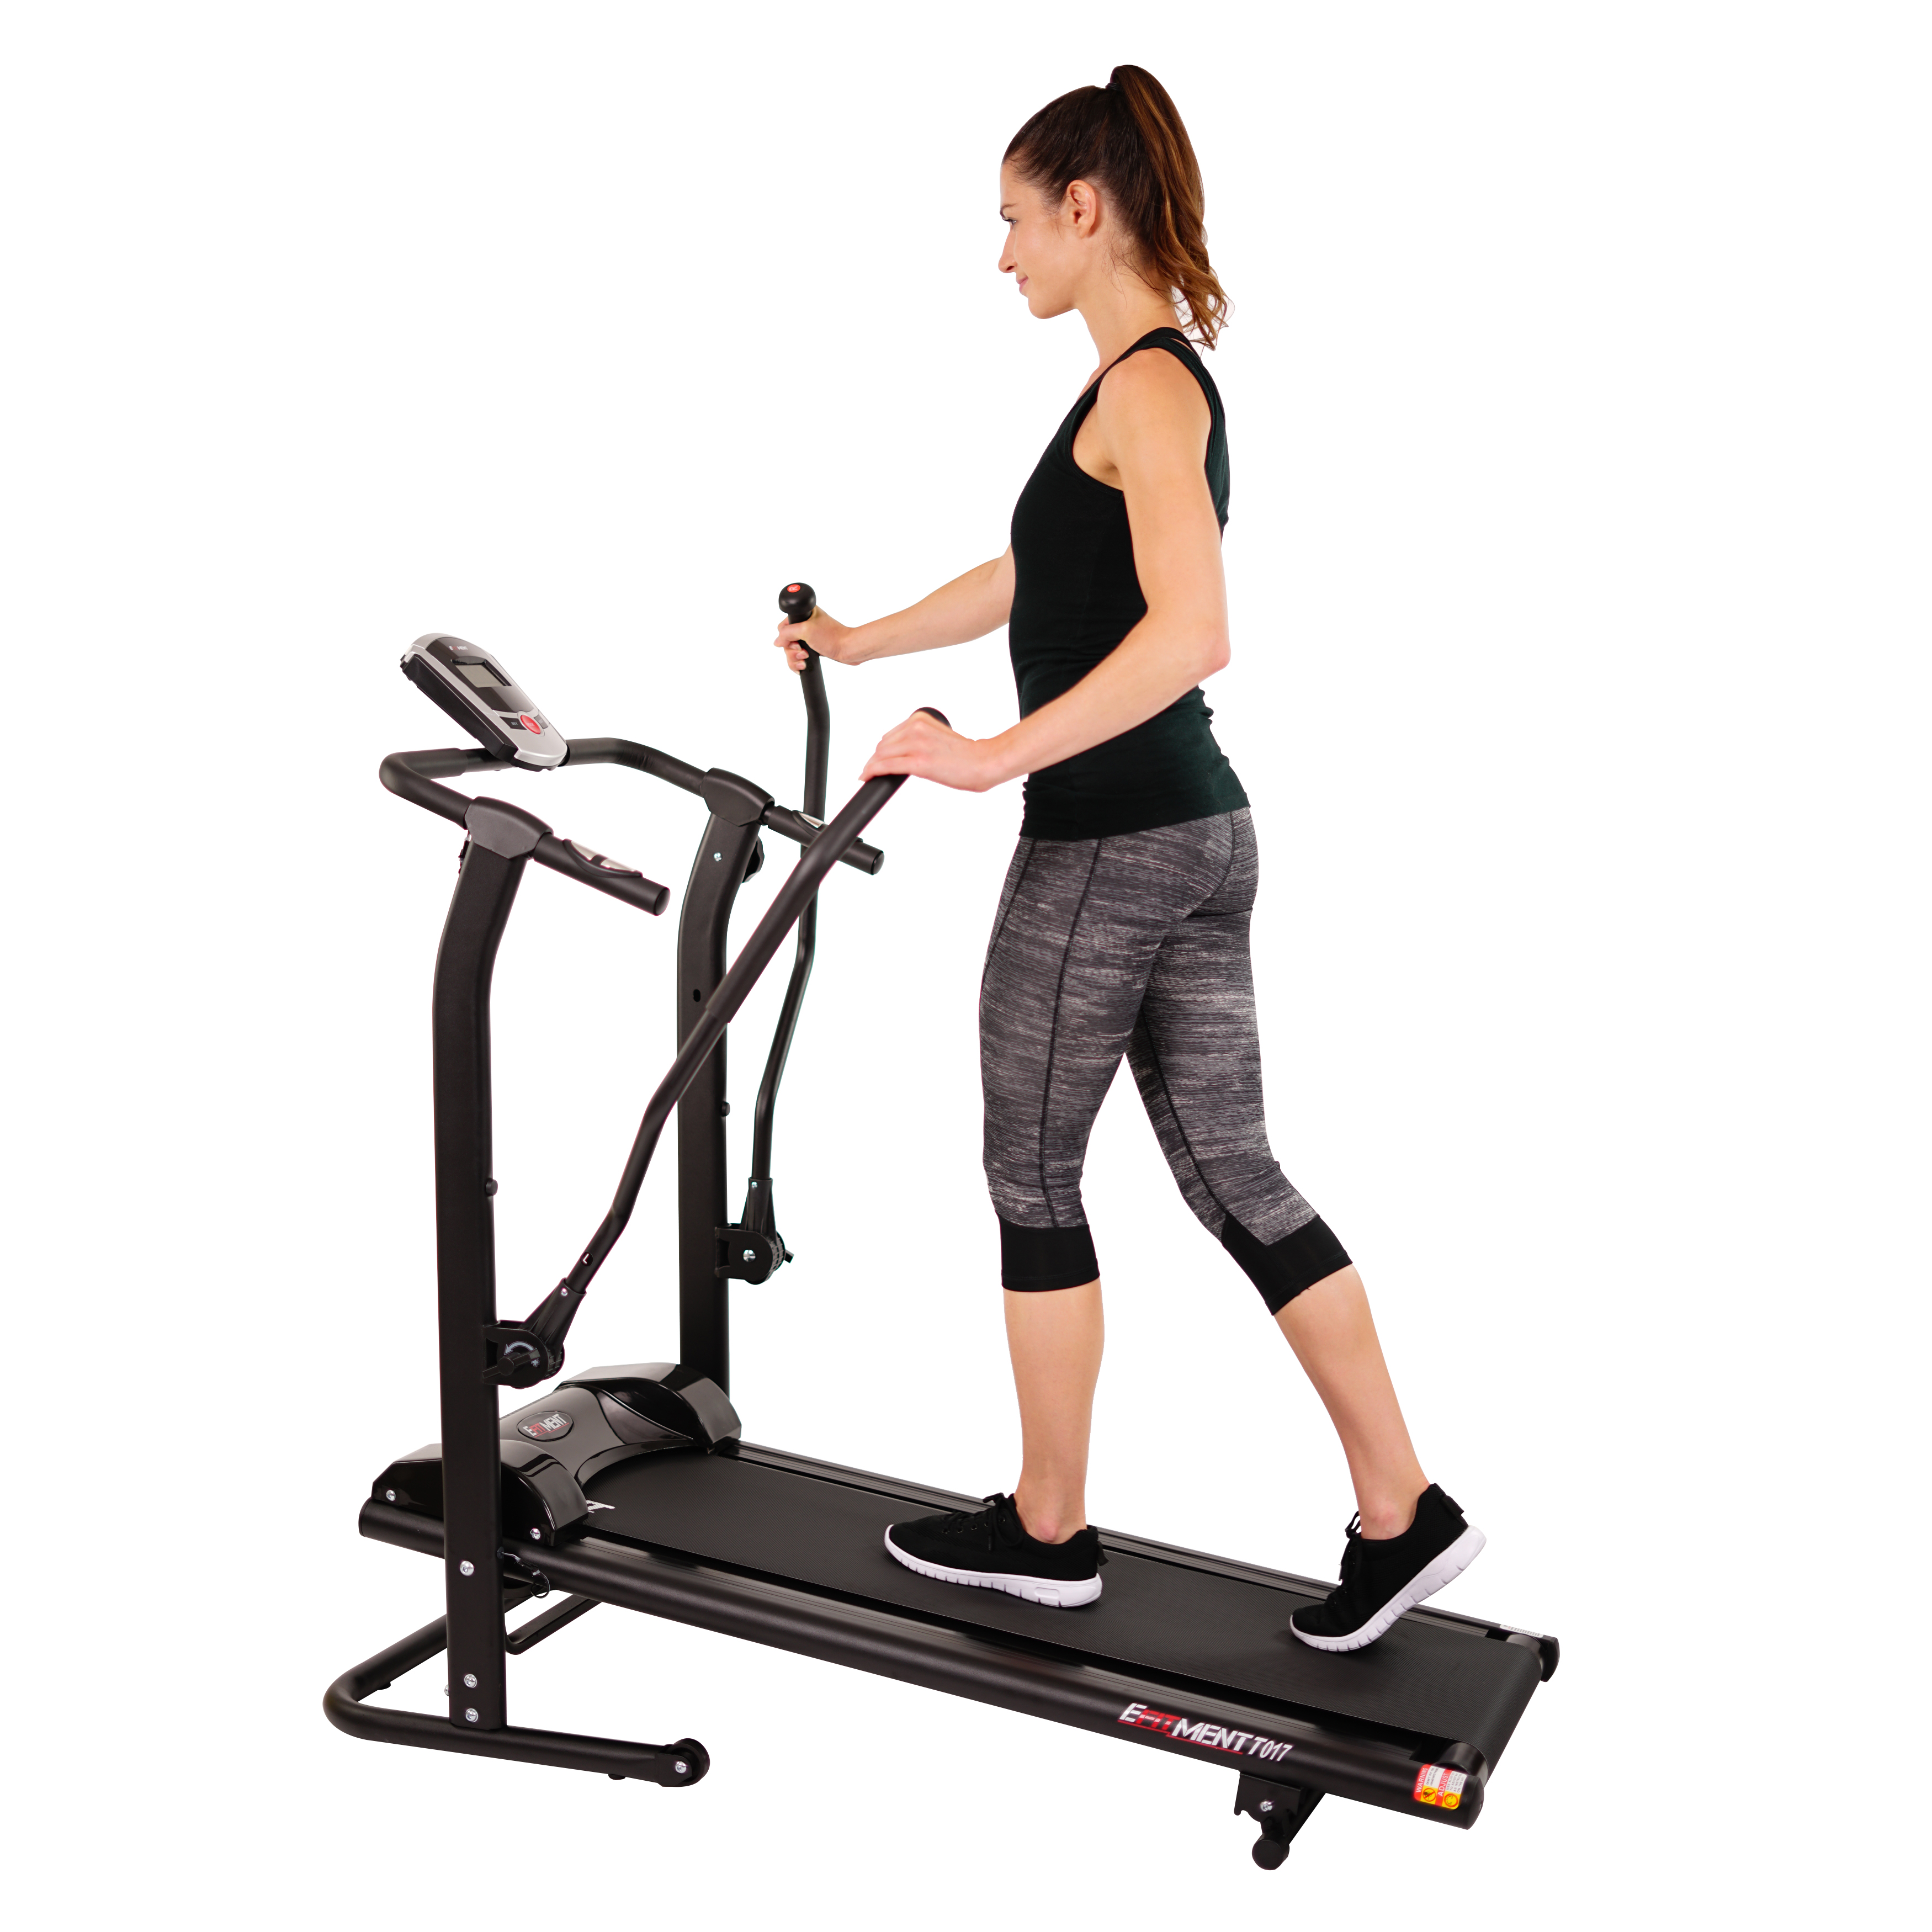 EFITMENT T017 Adjustable Incline Manual Treadmill with Arm ...